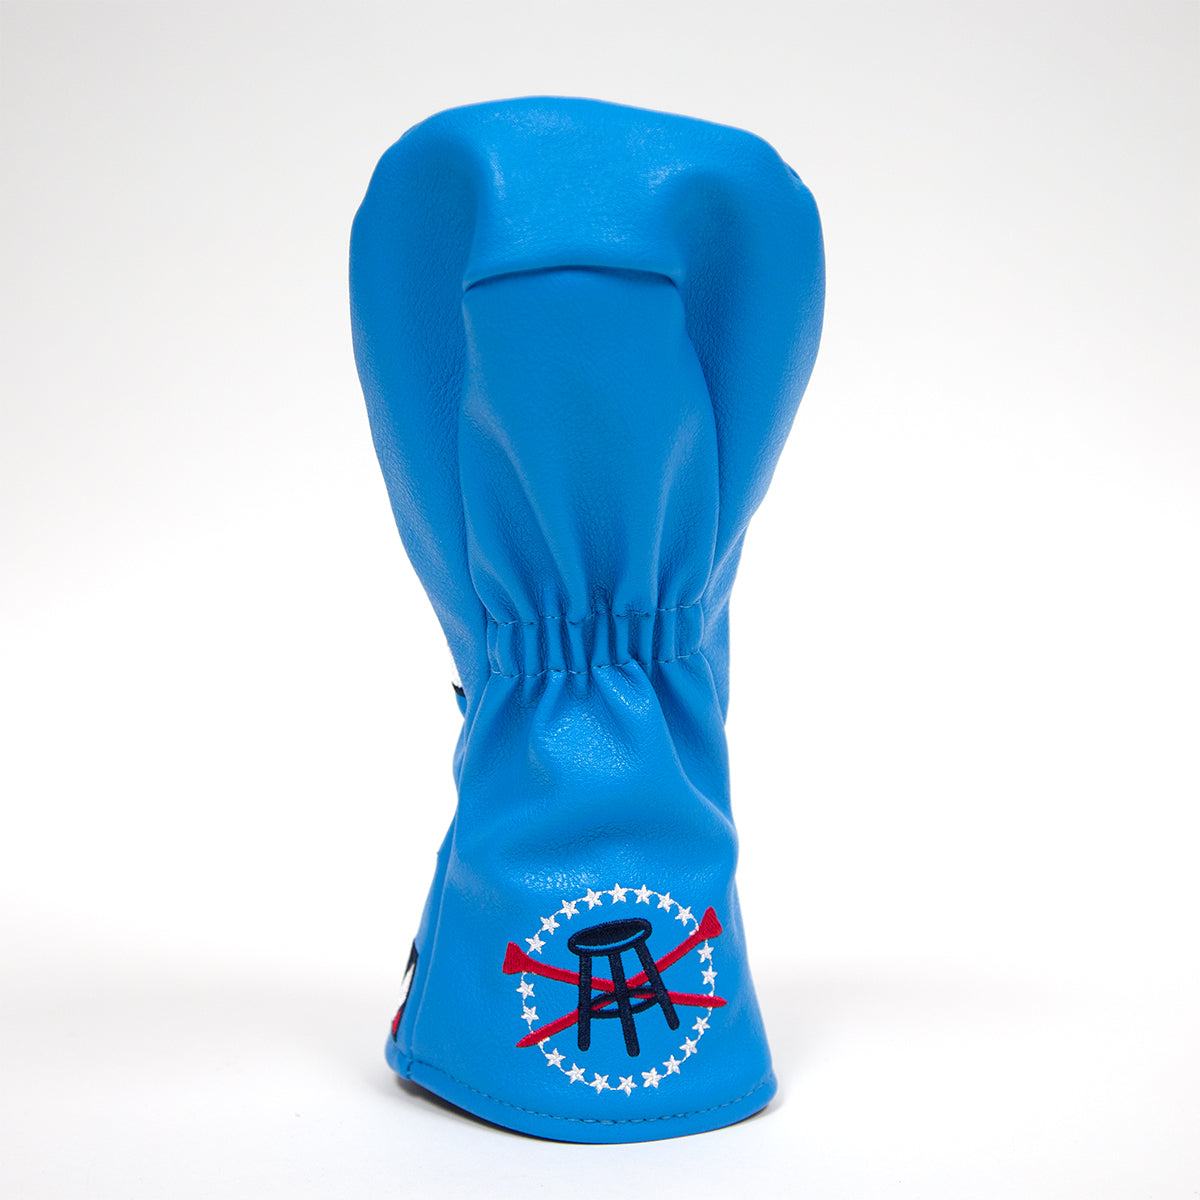 Barstool Golf Ain't No Hobby Fairway Headcover (Light Blue)-Golf Accessories-Fore Play-Light Blue-One Size-Barstool Sports